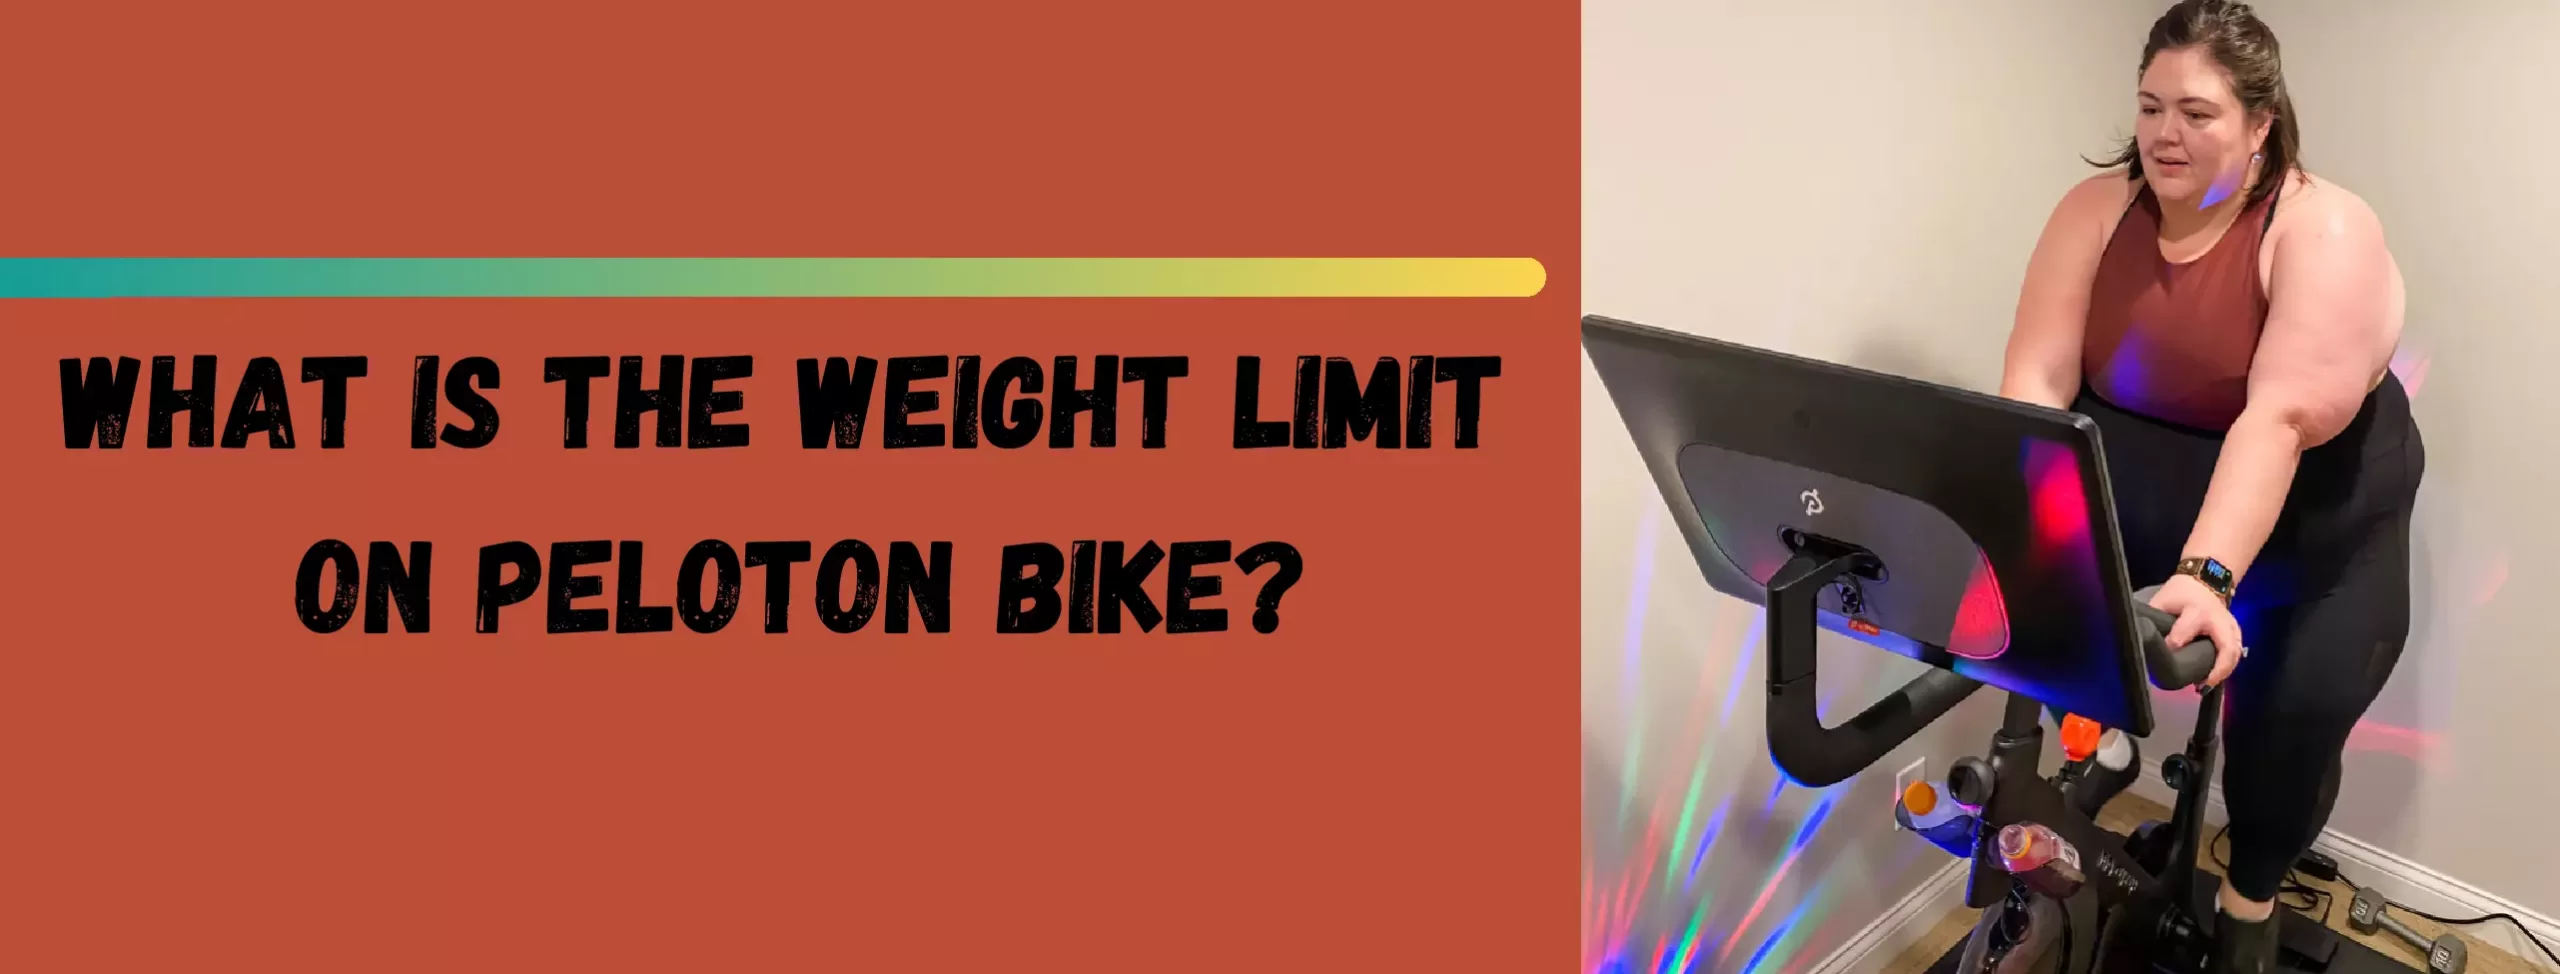 What is the Weight Limit on a Peloton Bike,what is the flywheel weight on a peloton bike,what is the weight of a peloton bike,what is the weight limit for a peloton,Weight Limit on a Peloton Bike,is there a weight limit for peloton,Weight Limit Peloton Bike,Weight Limit Peloton,weight limit peloton tread,does peloton have a weight limit,is there a weight limit on the peloton bike